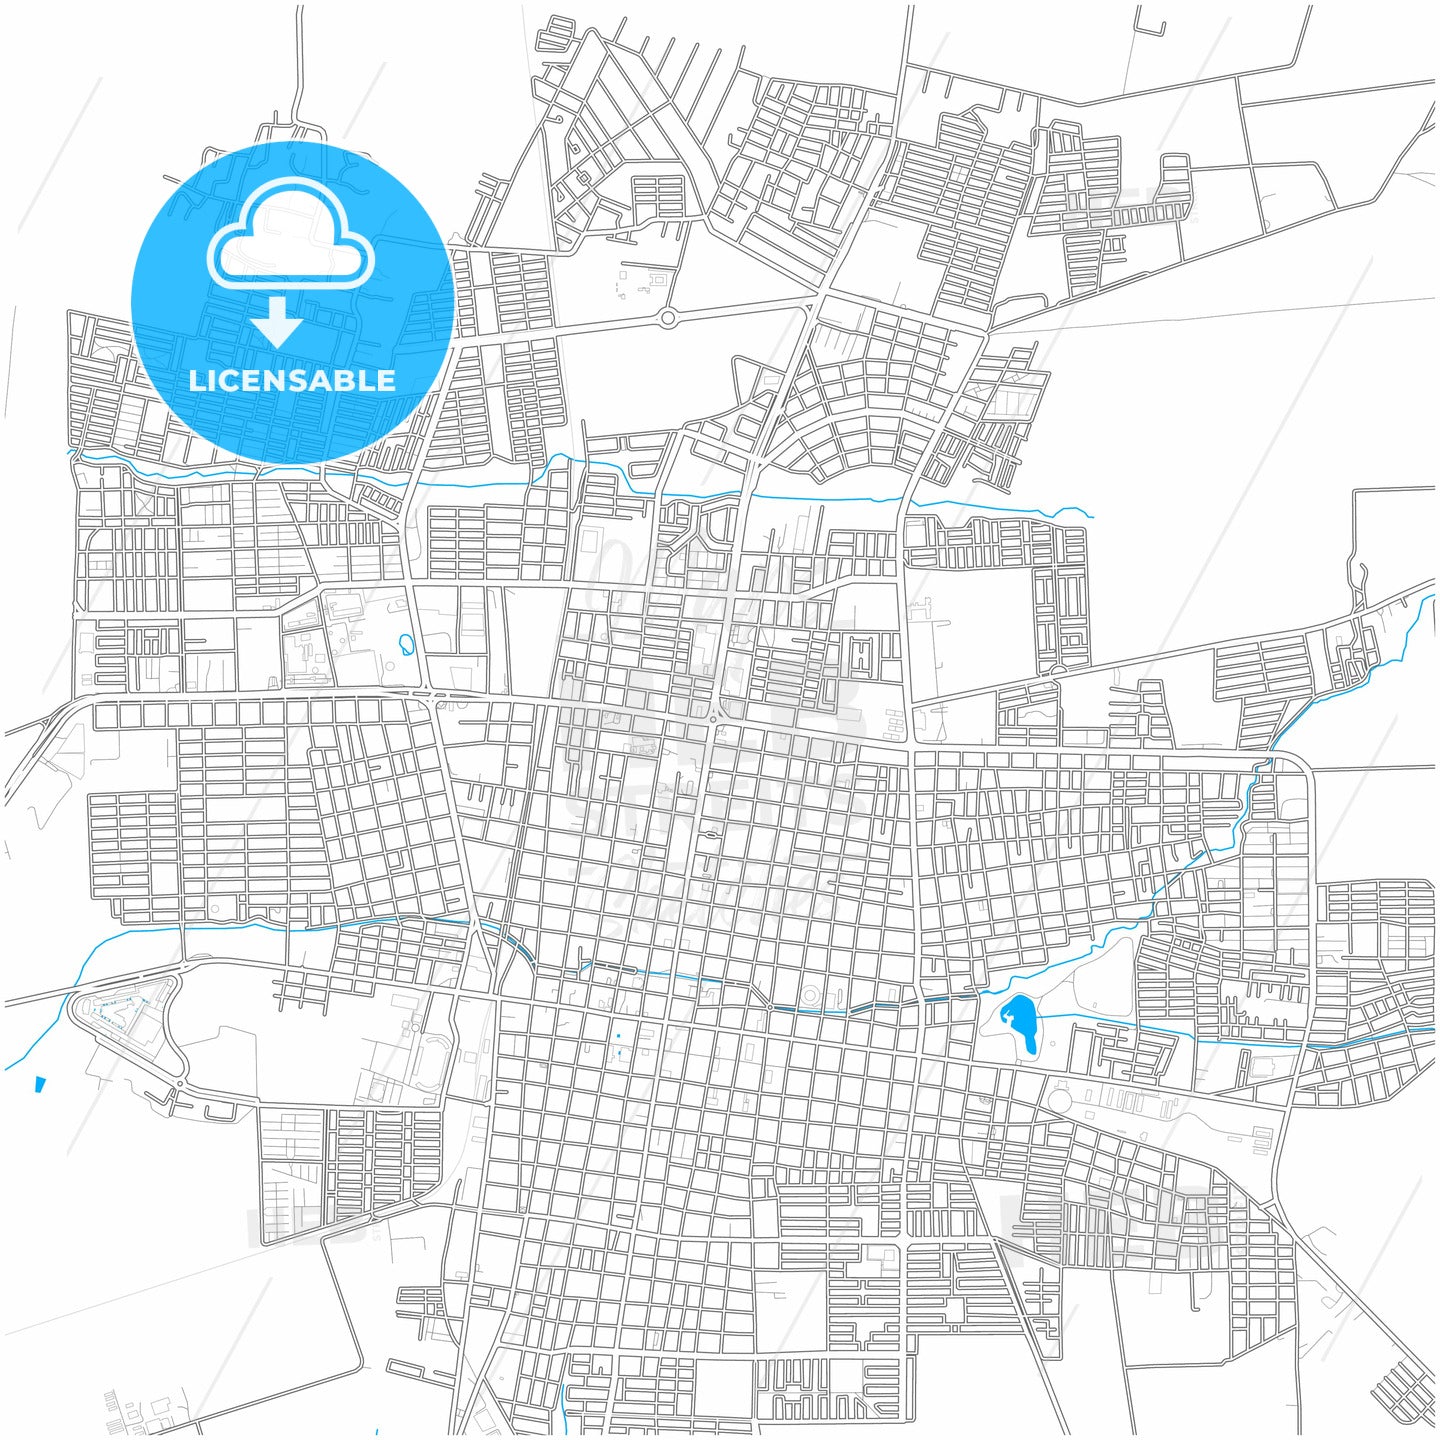 Palmira, Colombia, city map with high quality roads.